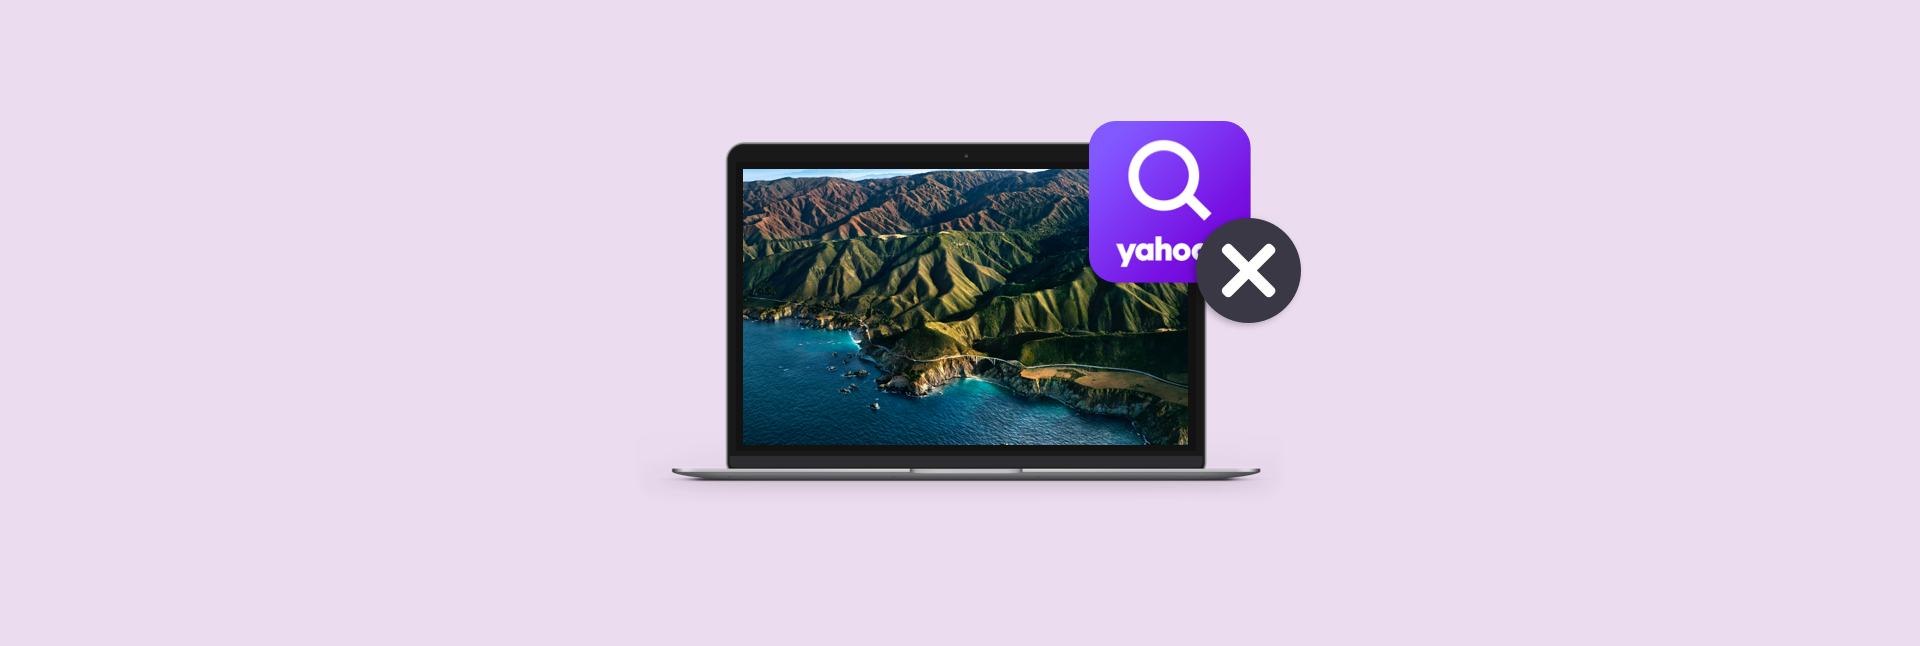 please help remove ads on email page yahoo for mac